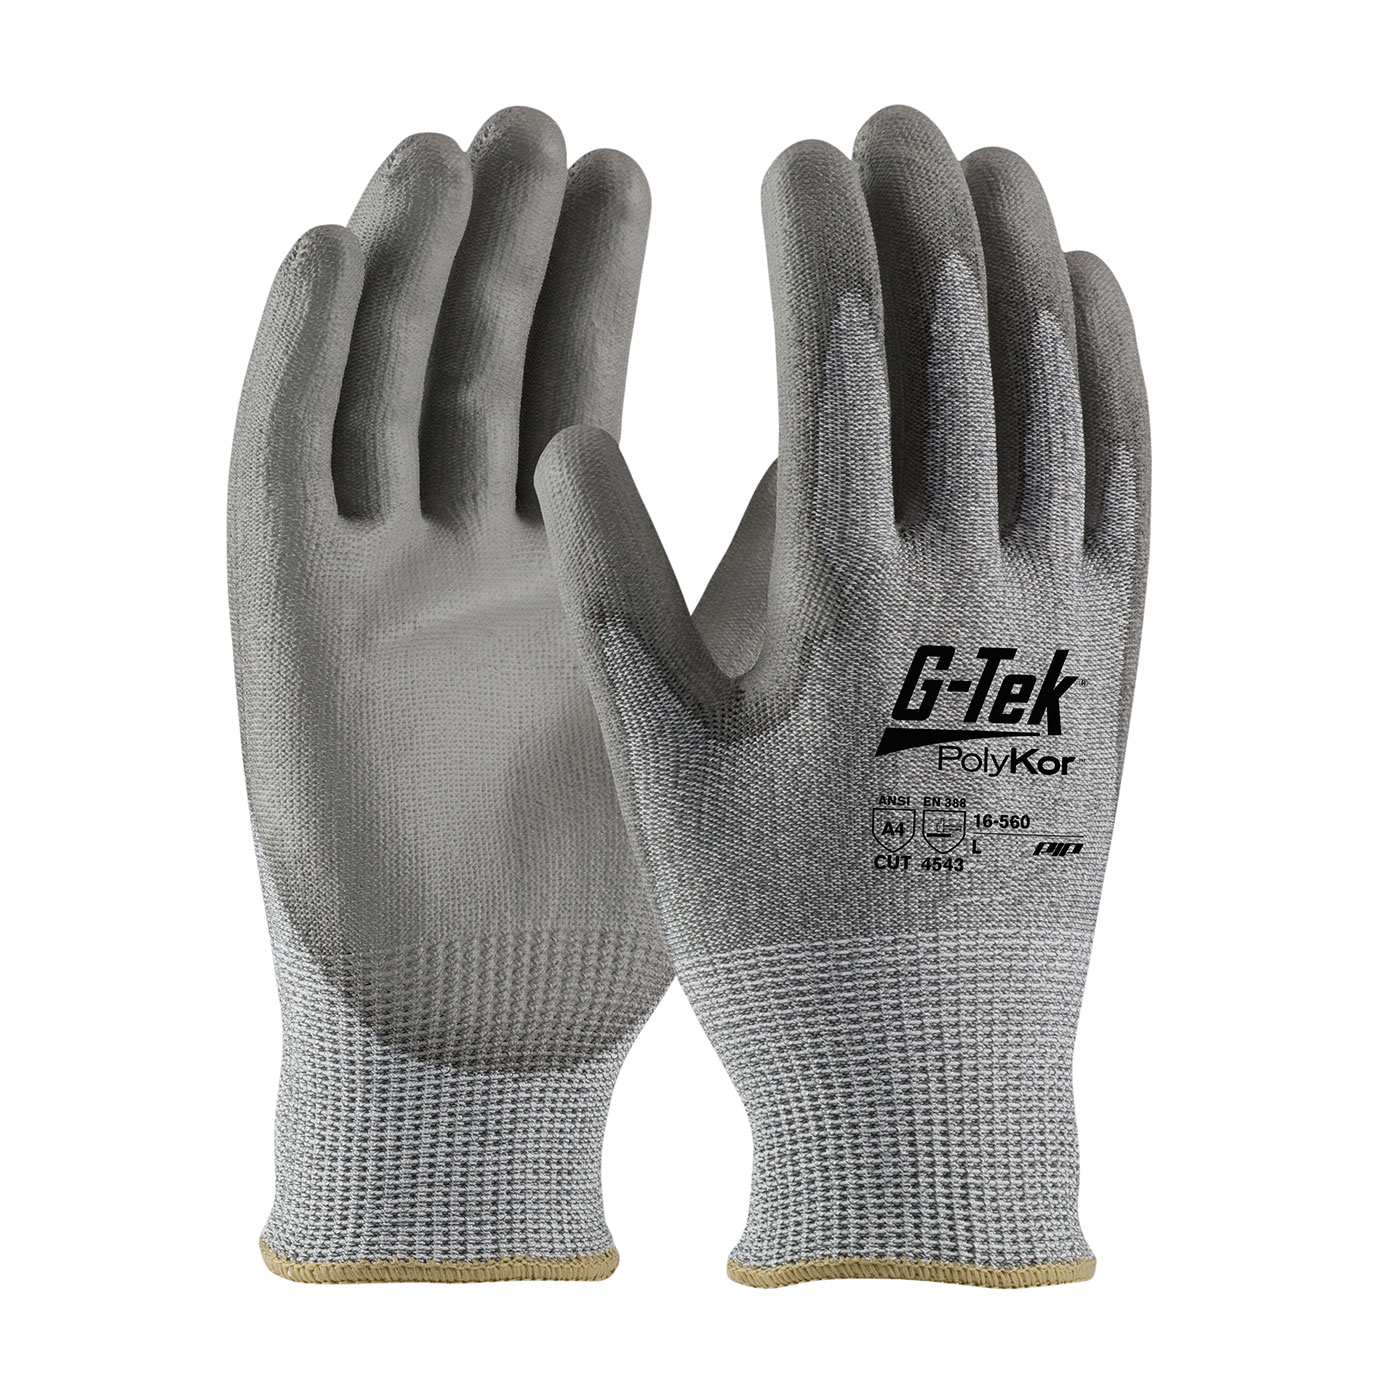 PIP 16-560/XL G-Tek PolyKor Seamless Knit PolyKor Blended Glove with Polyurethane Coated Smooth Grip on Palm & Fingers - X-Large PID-16 560 XL